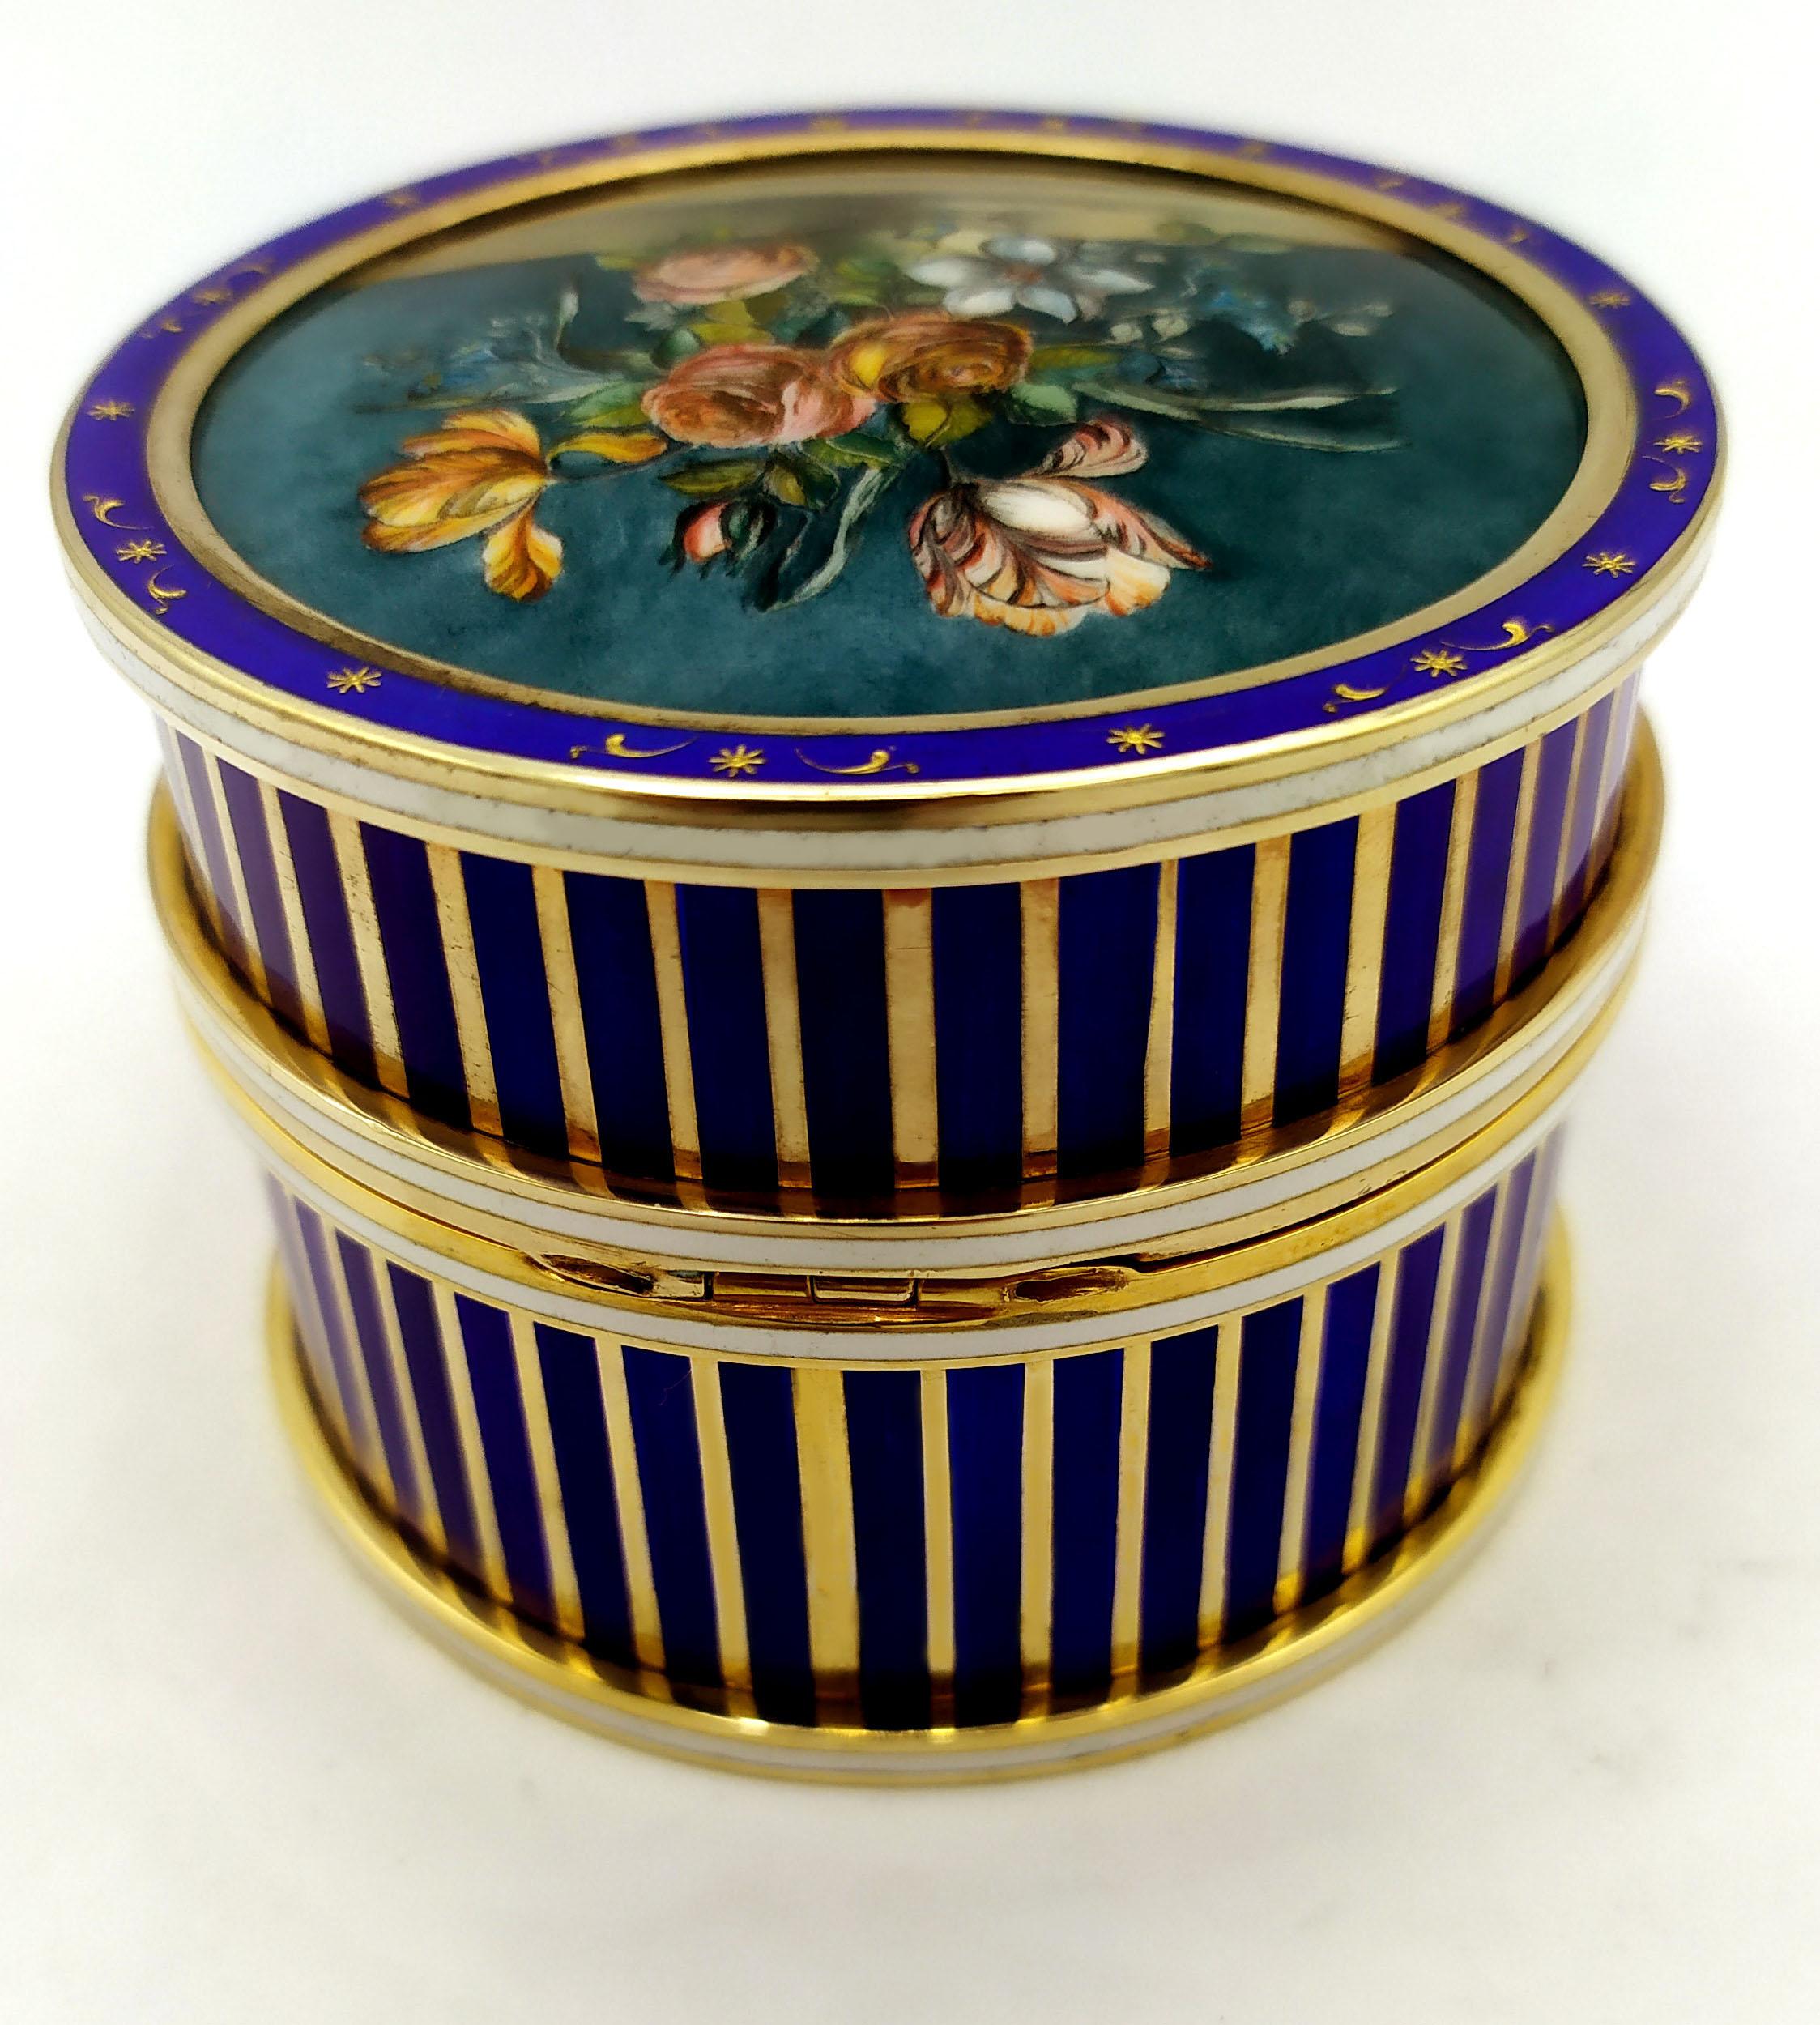 Napoleon III Table Box Enamel on guillochè with “paillons” in pure gold on the upper circle S For Sale